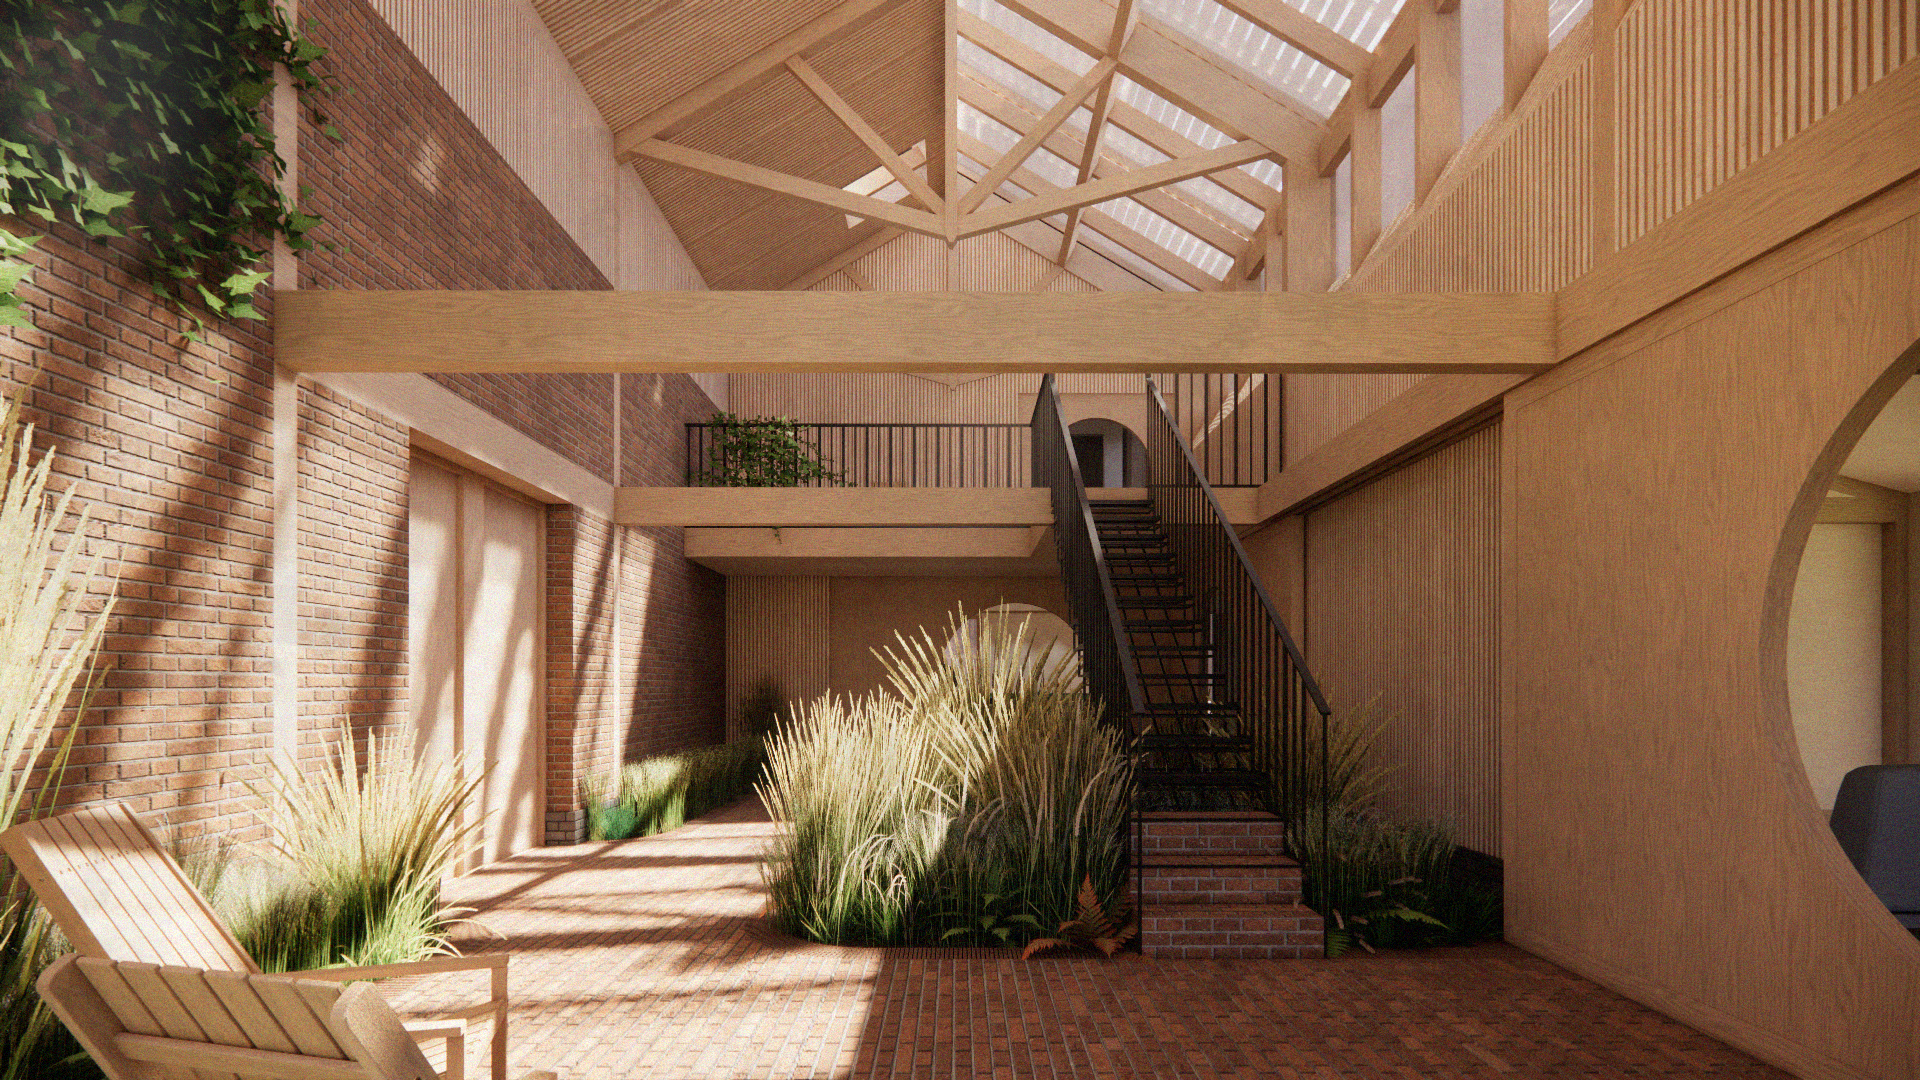 Interior view of atrium with planting and natural light